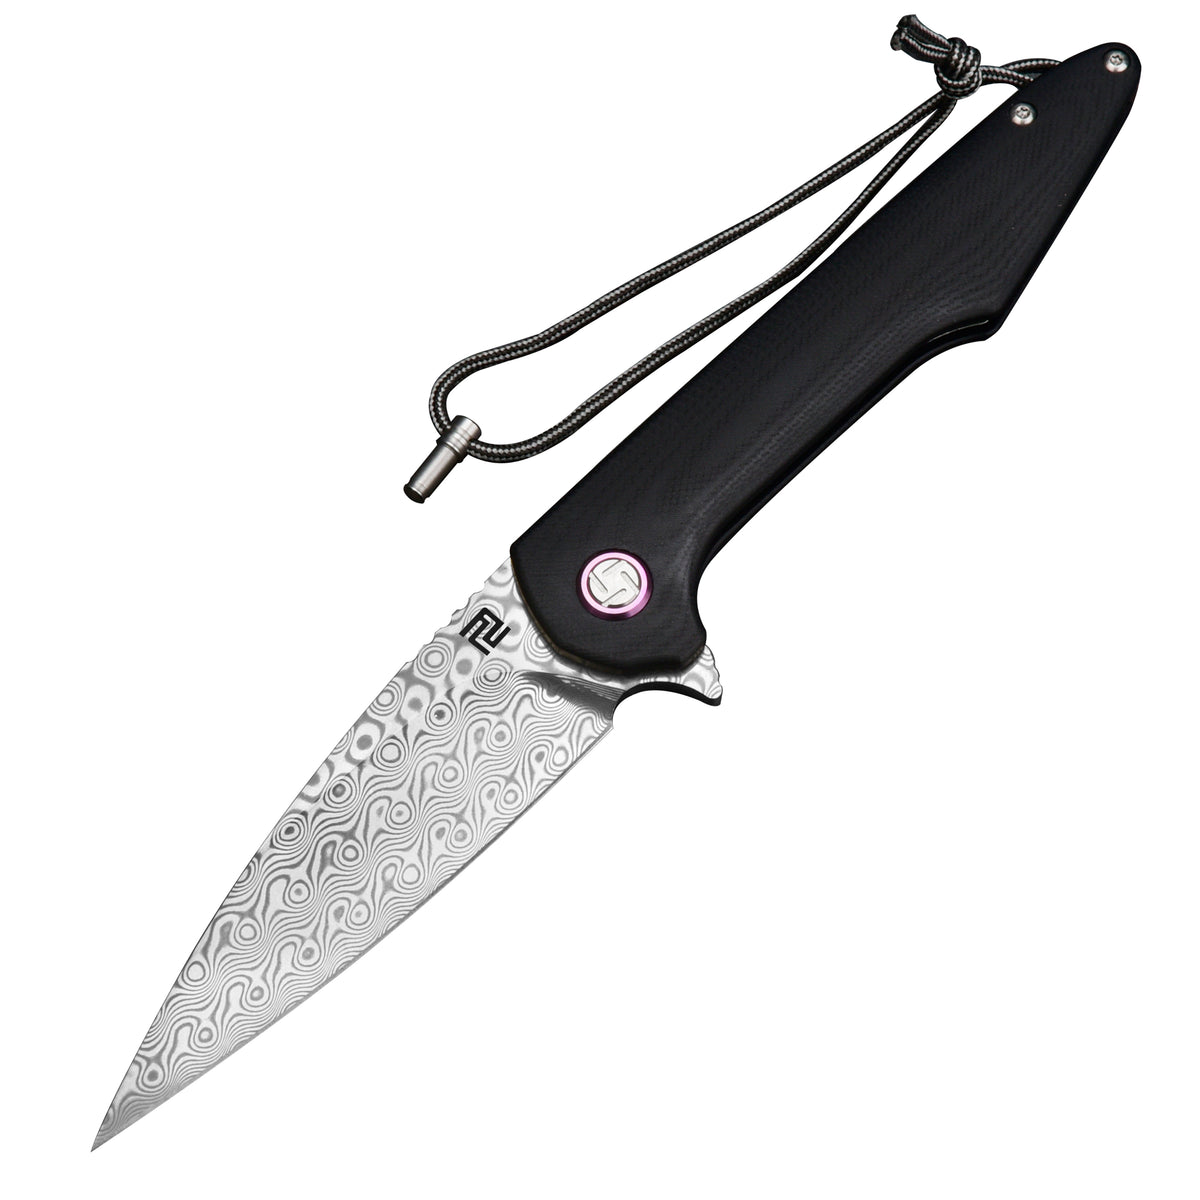  outROAR Gear Folding Scalpel Knife with Carbon Fiber Handle &  10 Replaceable Blades, Slip Joint Action, EDC Pocket Knife : Tools & Home  Improvement